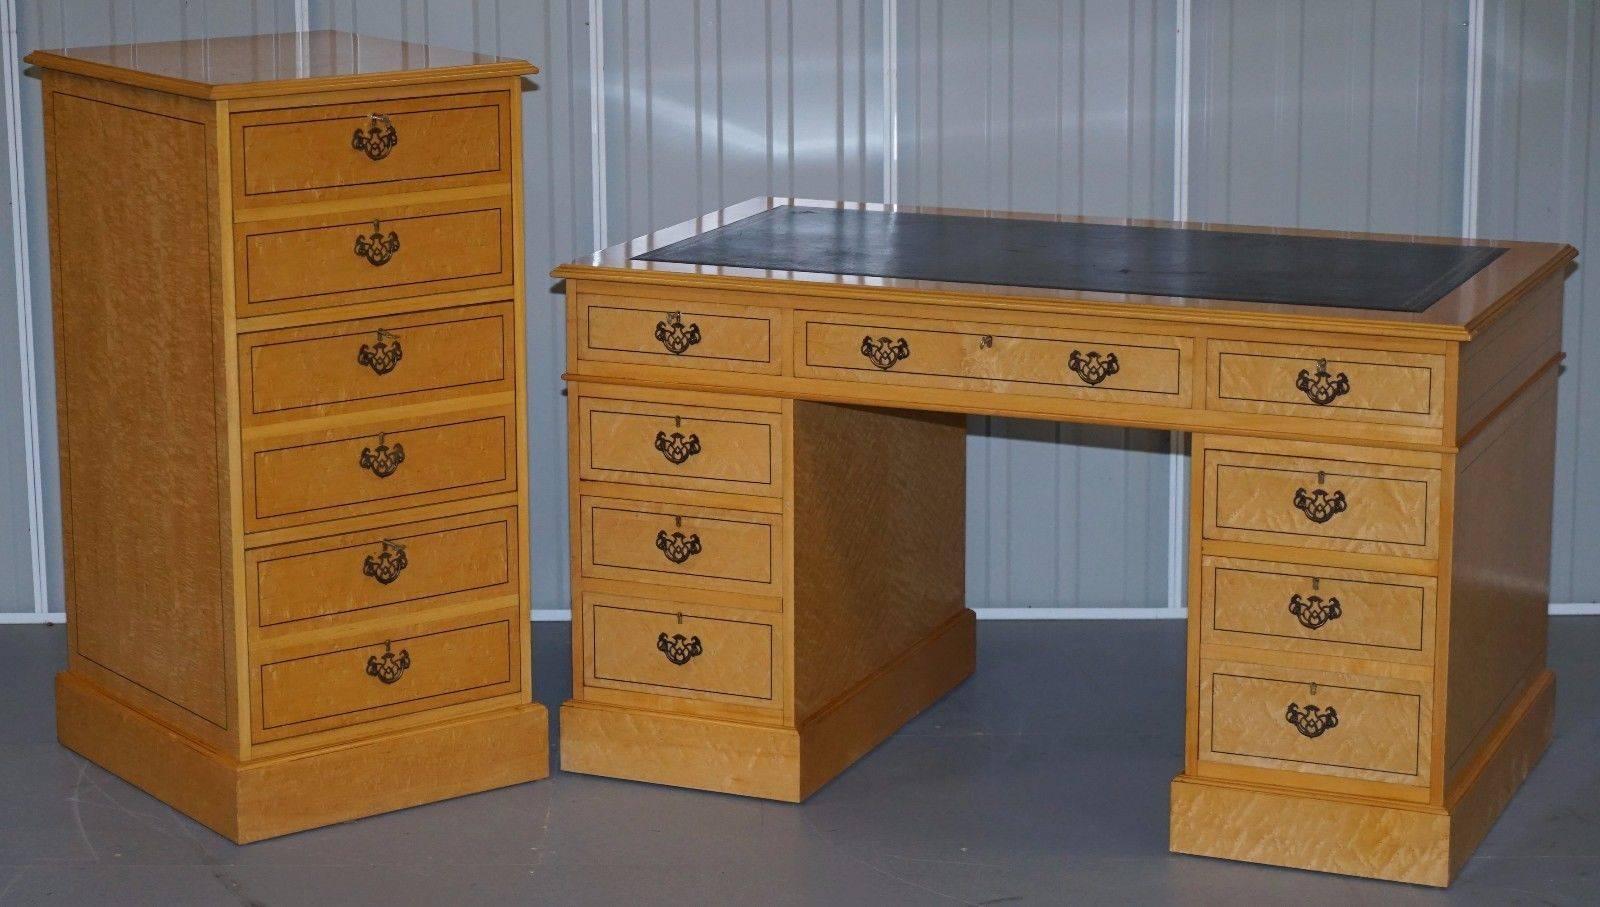 We are delighted to offer for auction this very rare and really quite stunning Birdseye Maple tall three bank filing cabinet with locks and keys

We have the matching Partner desk as well, it’s pictured below but not included in this auction, it